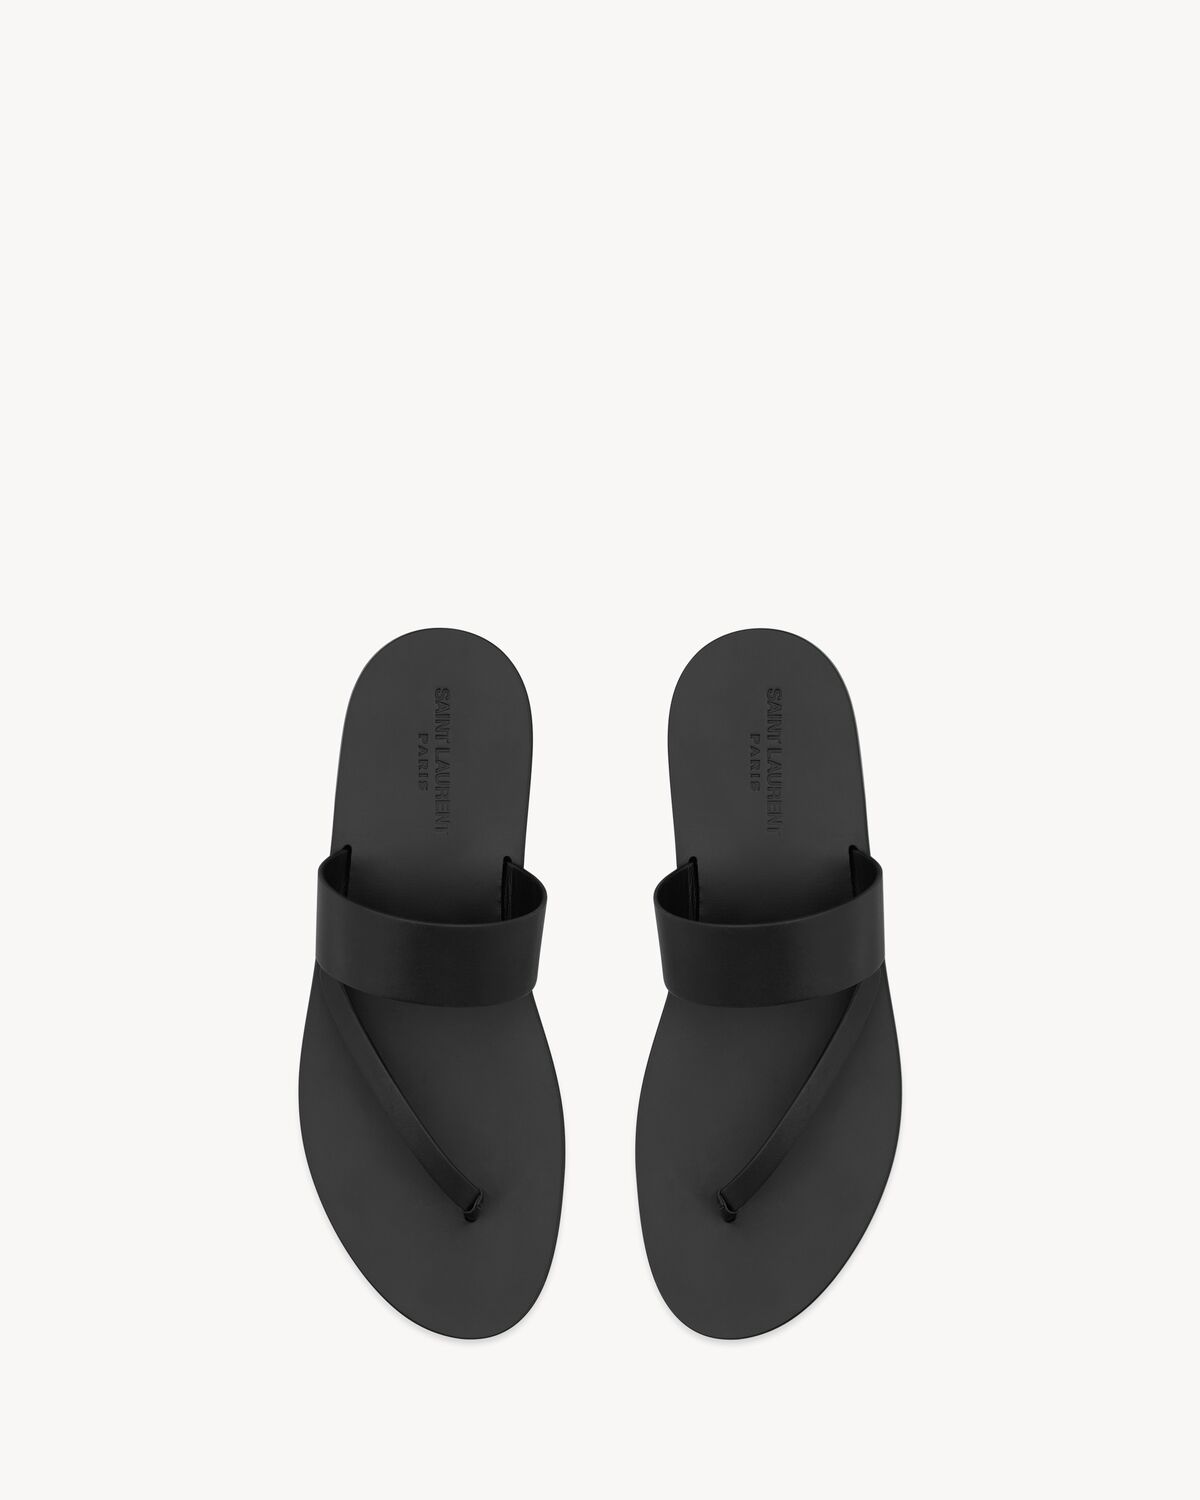 MILO slides in smooth leather